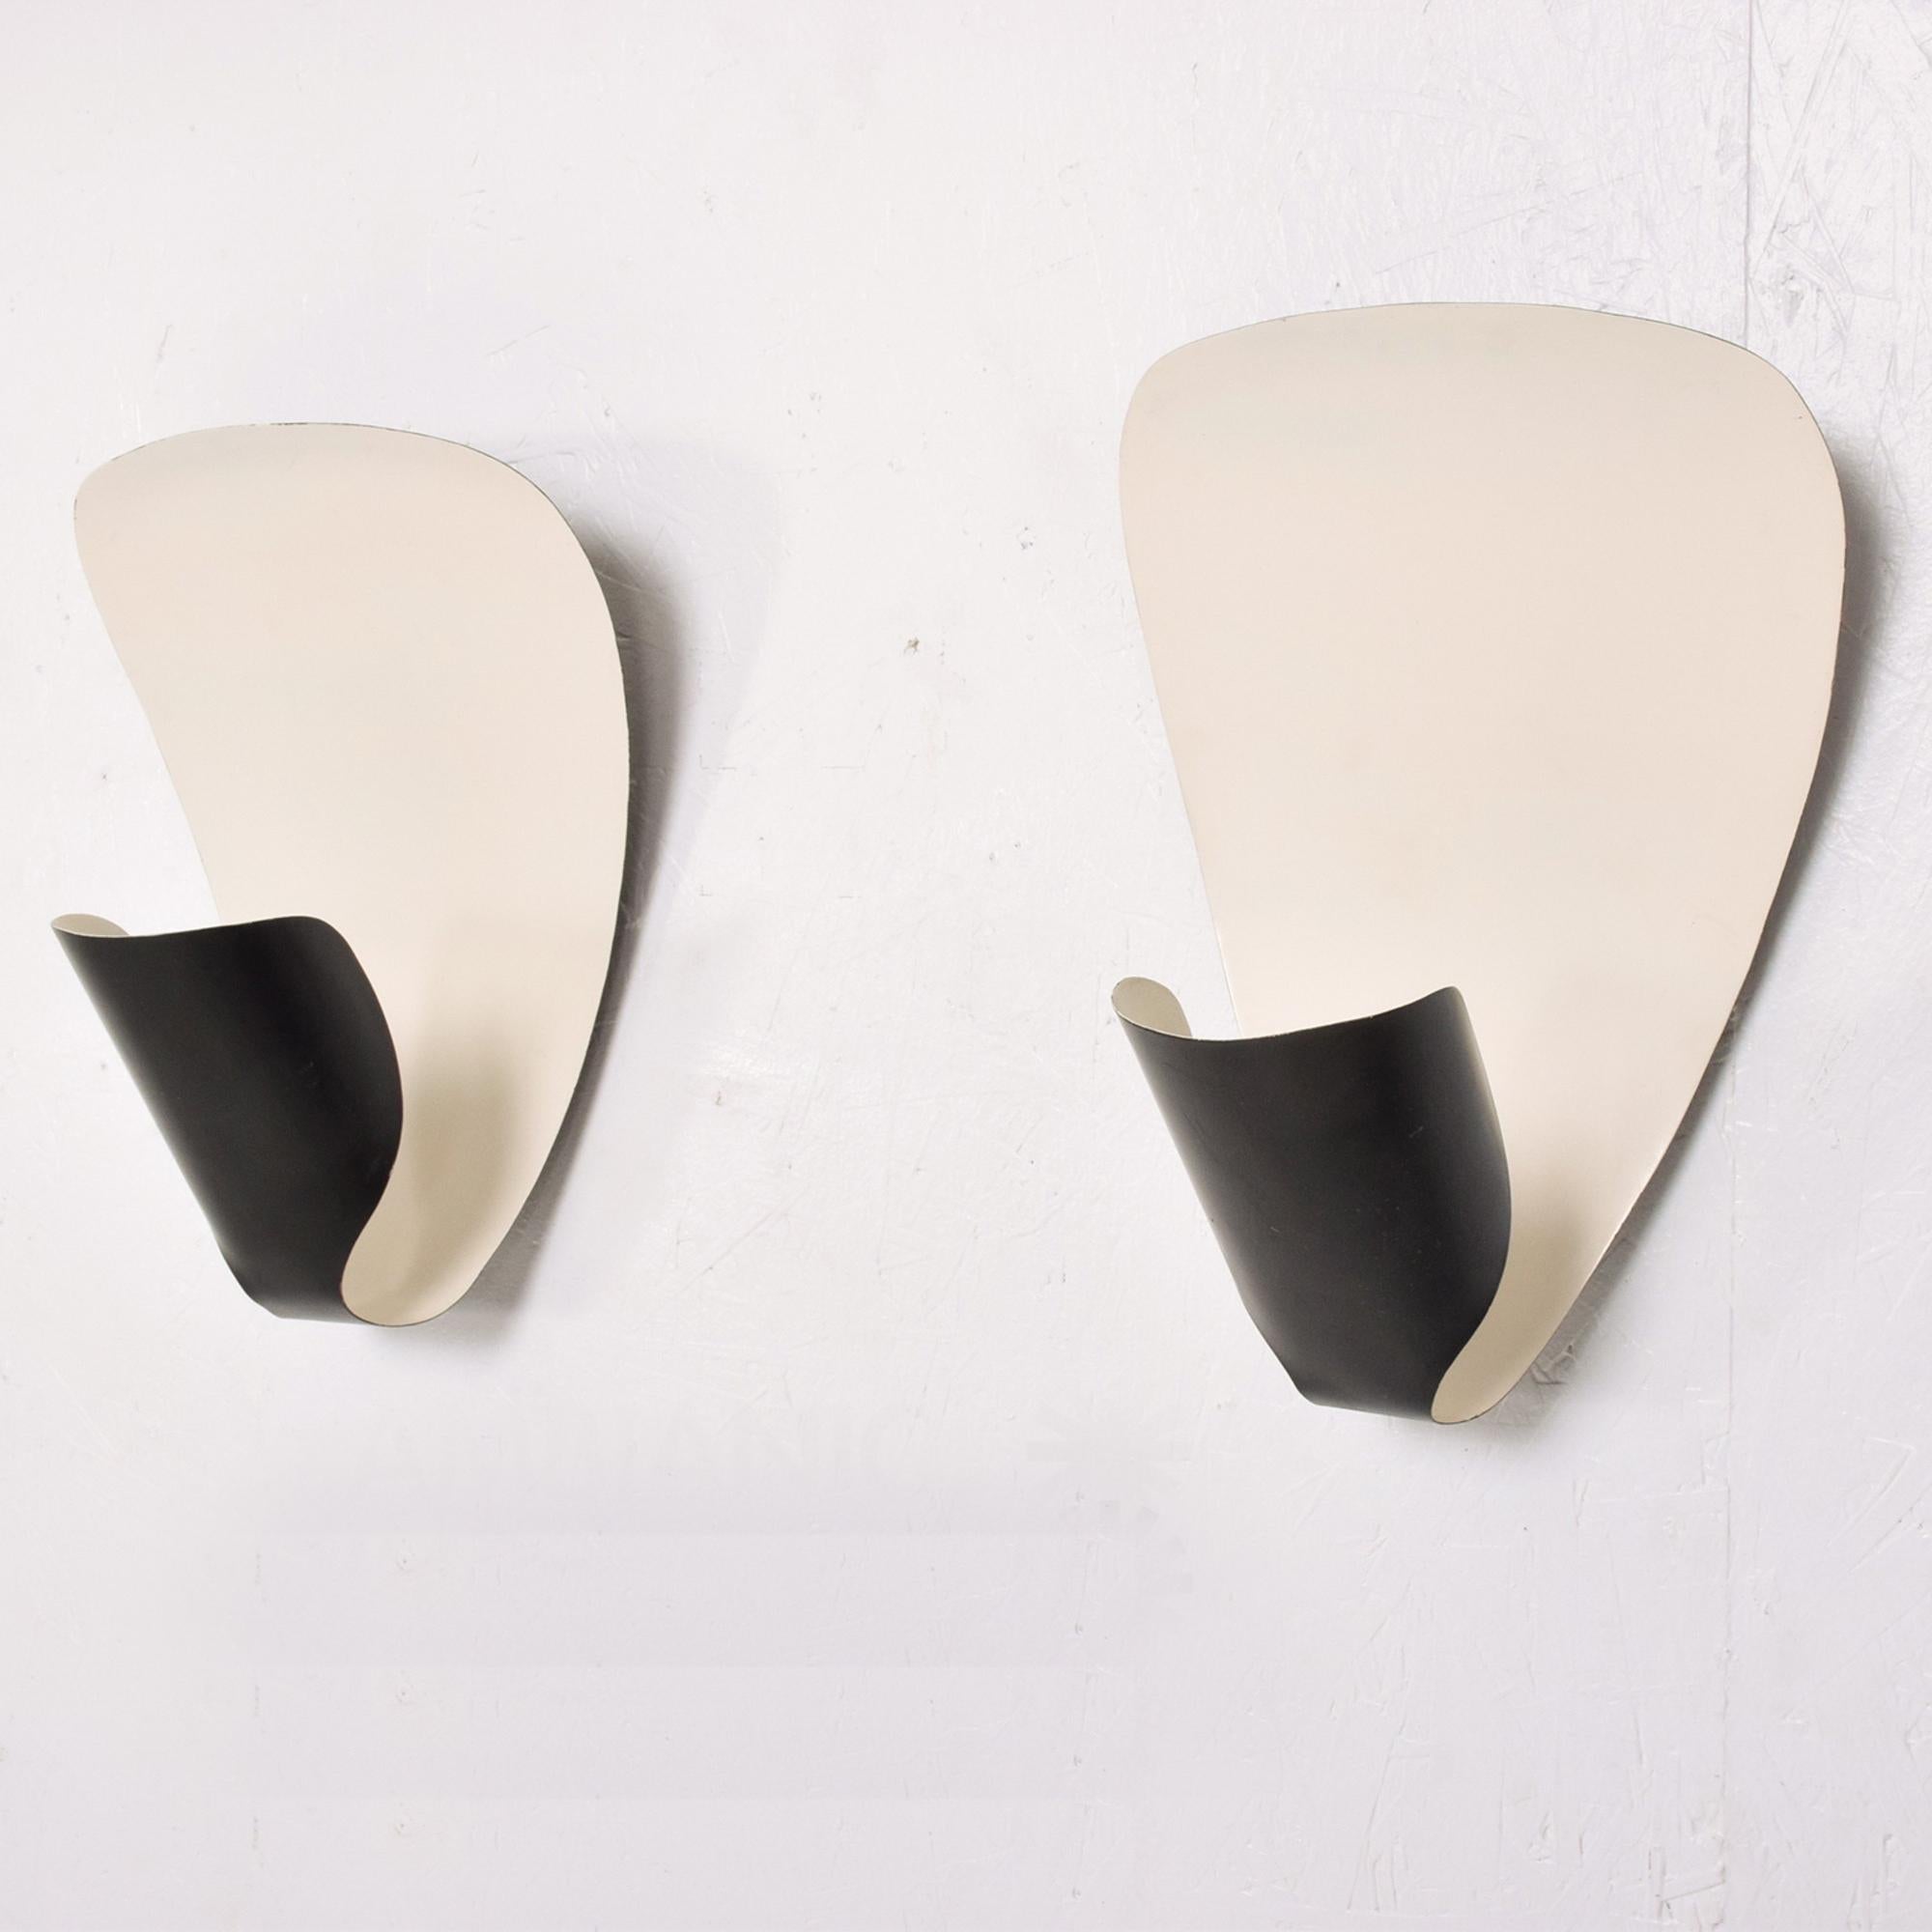 Sconces
A pair of Modern French Wall Sconces B206 by Michel Buffet. Reedition 2017 
Michel Buffet B206 black and white wall lamp. Originally designed in 1953, the later production pair was made with many of the same techniques and craftsmanship as